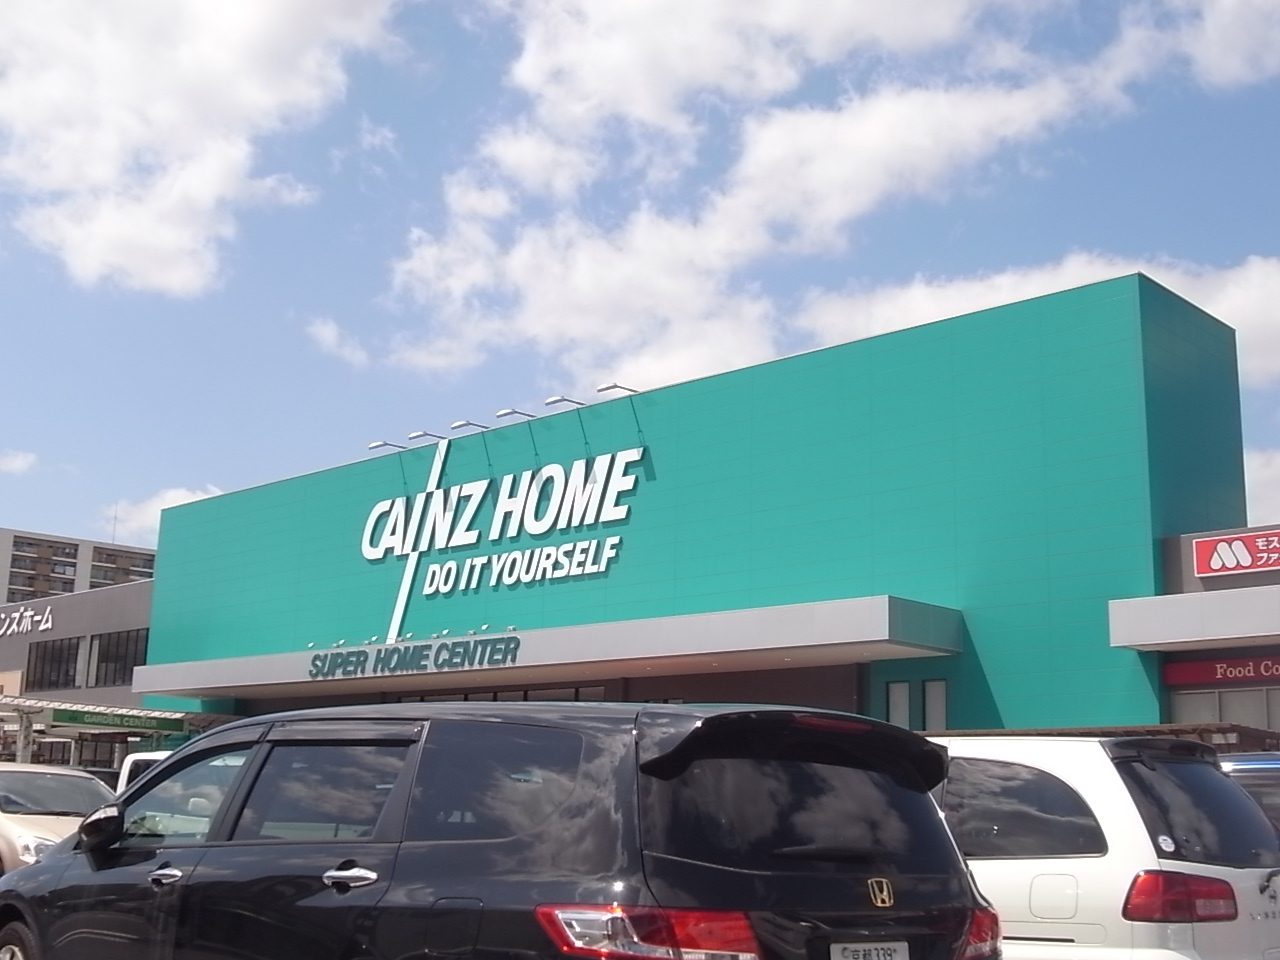 Home center. Cain home Nagoya Hotta store up (home improvement) 863m